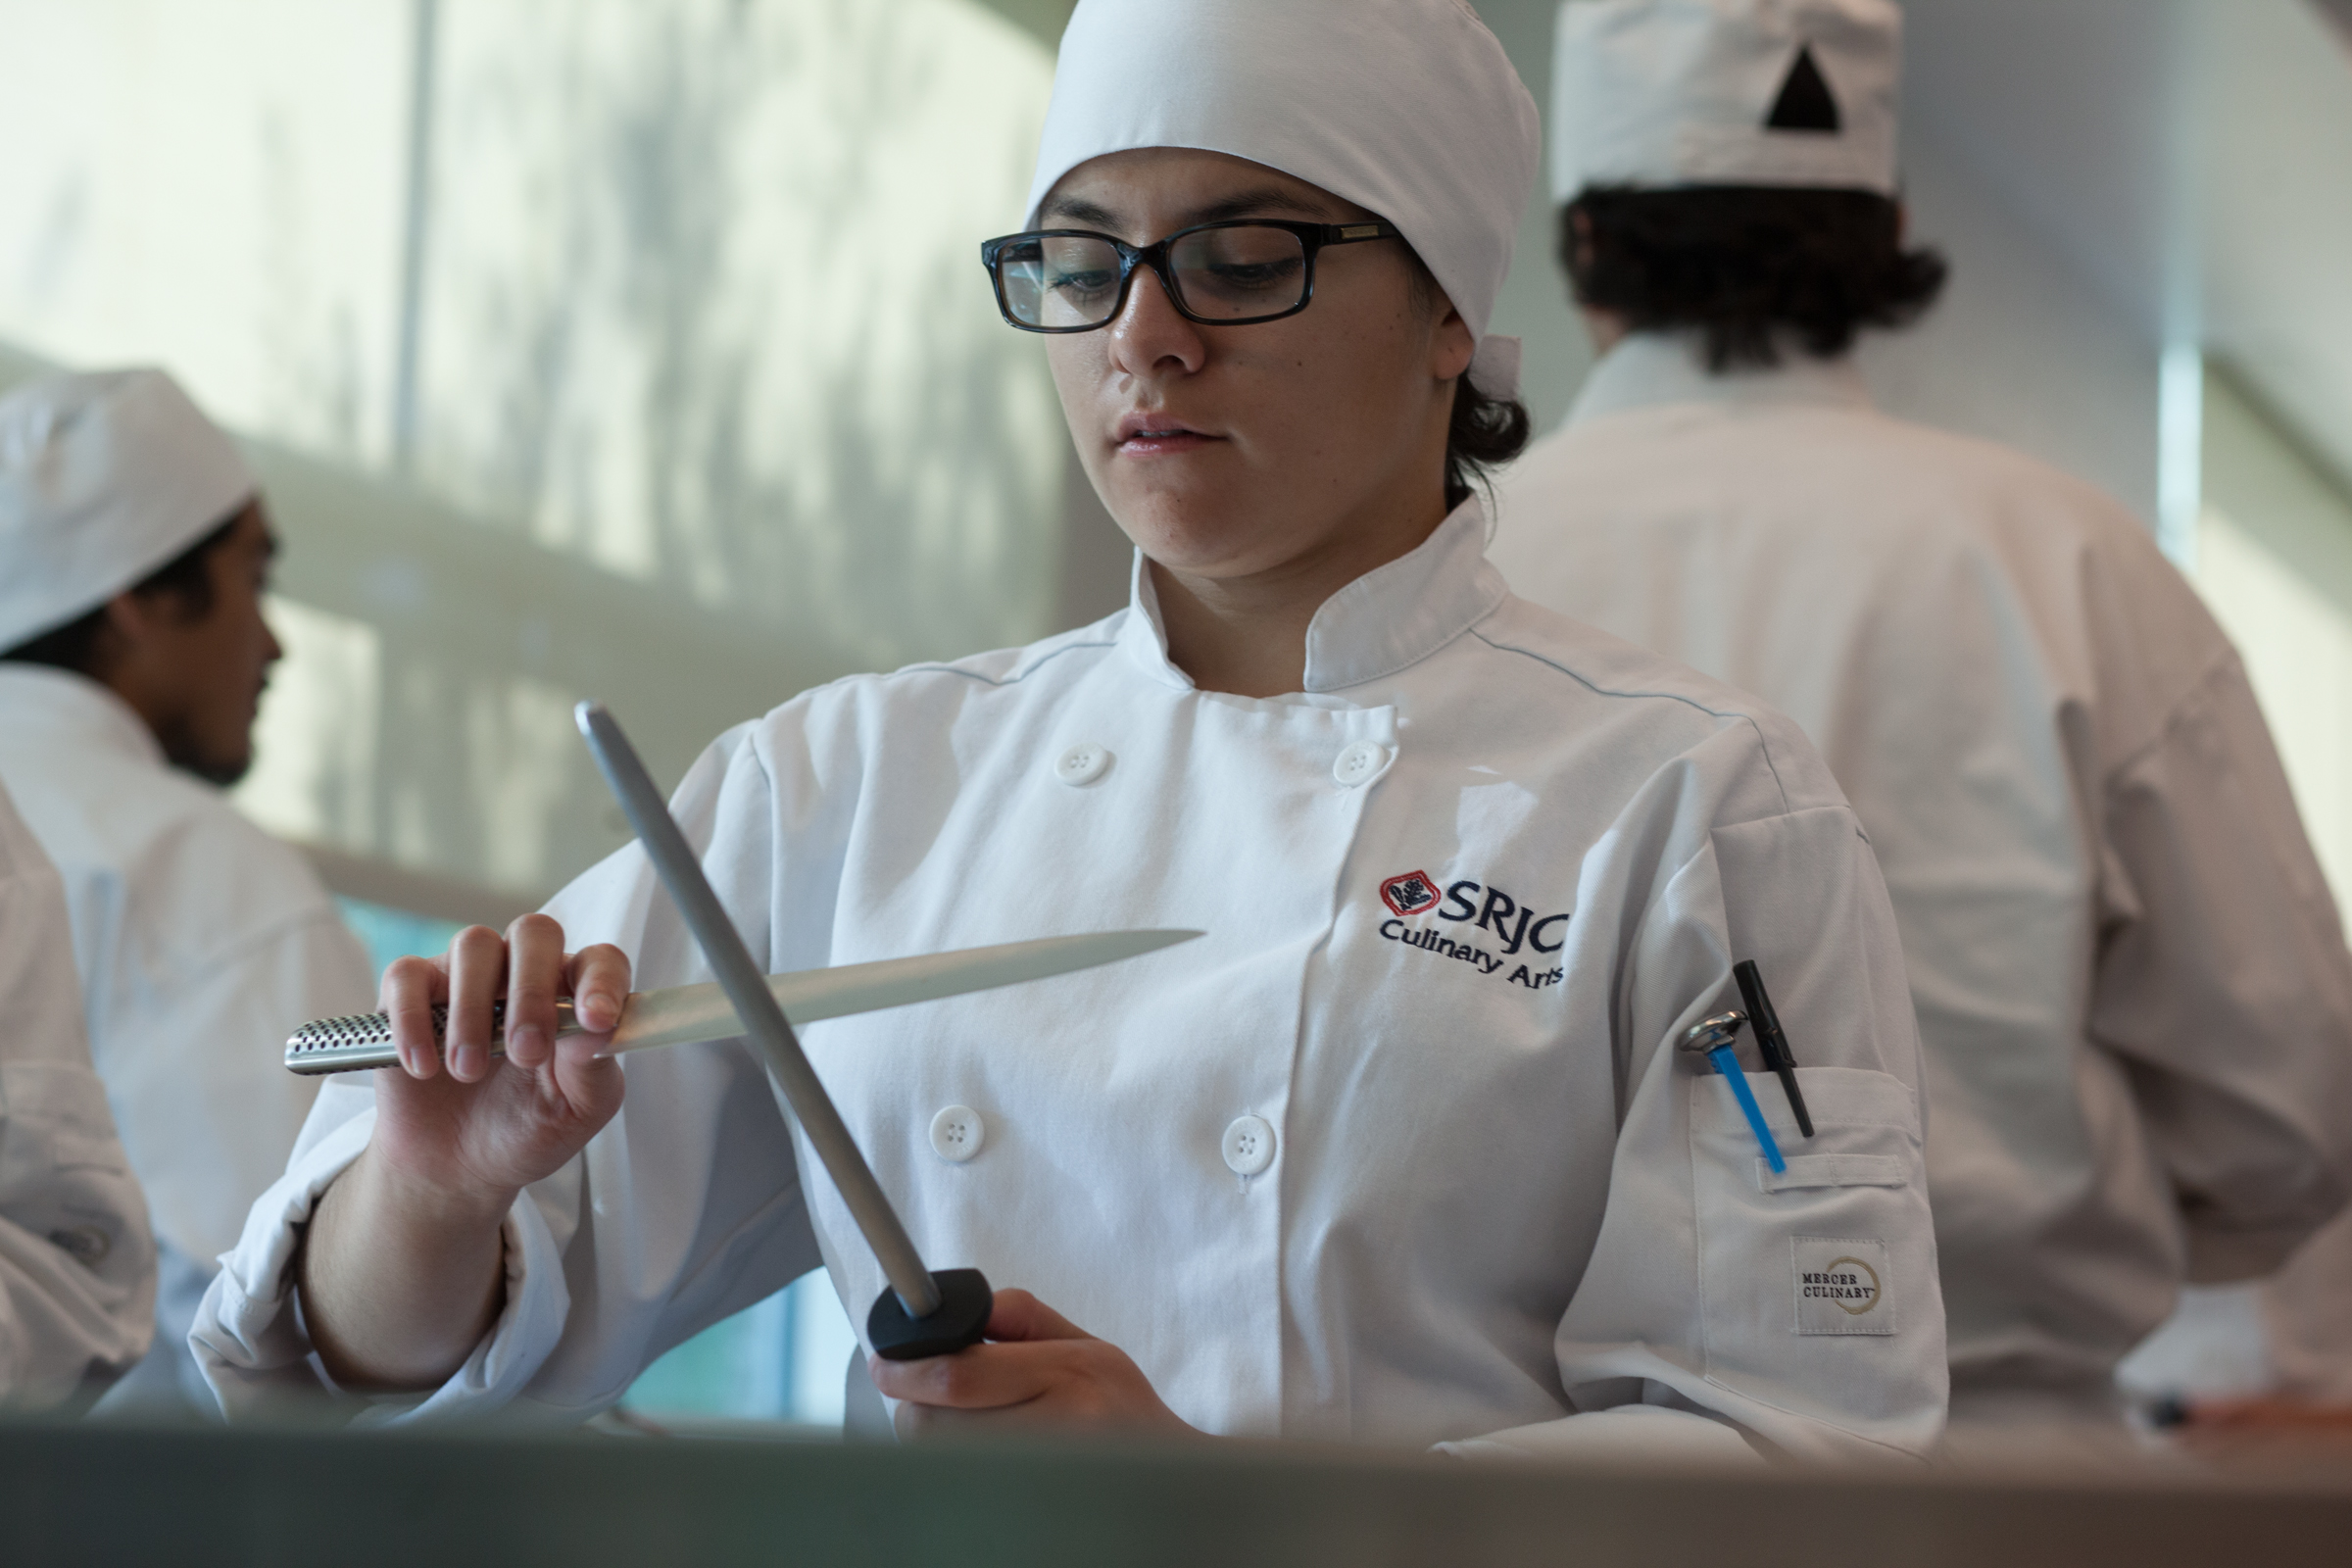 Culinary student sharpening a knife